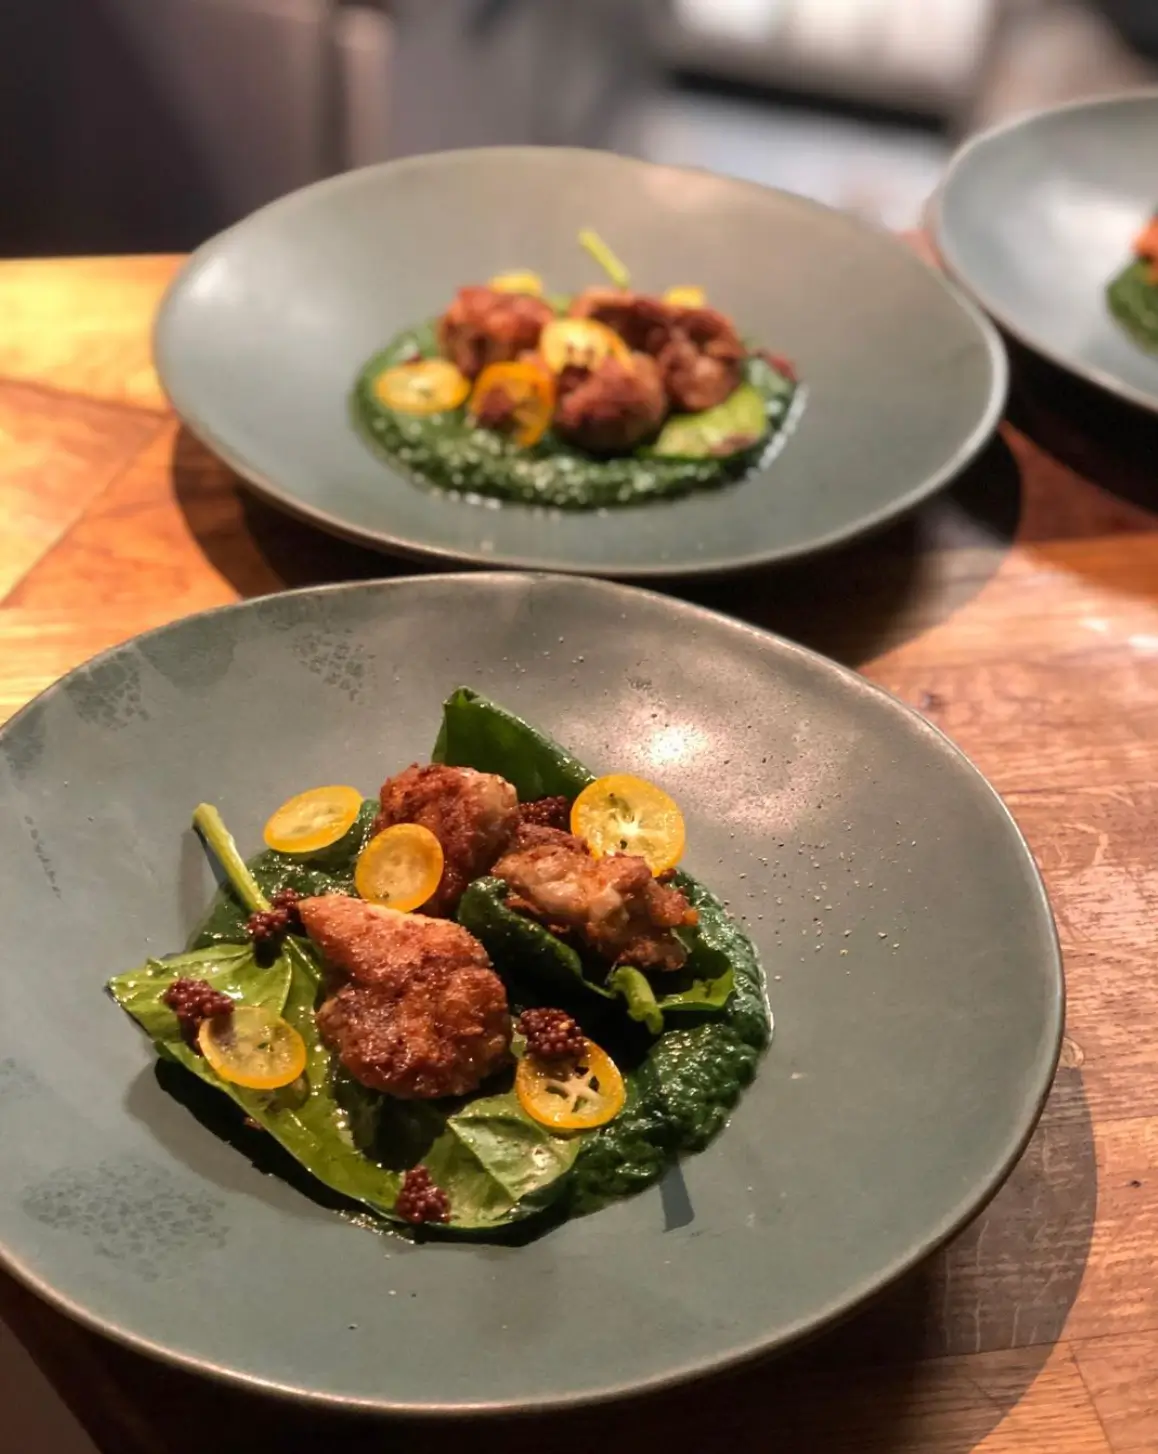 A gourmet dish featuring fried morsels on a bed of vibrant green sauce and garnished with kumquat slices, presented on a slate-colored plate at Des Terres, Paris.